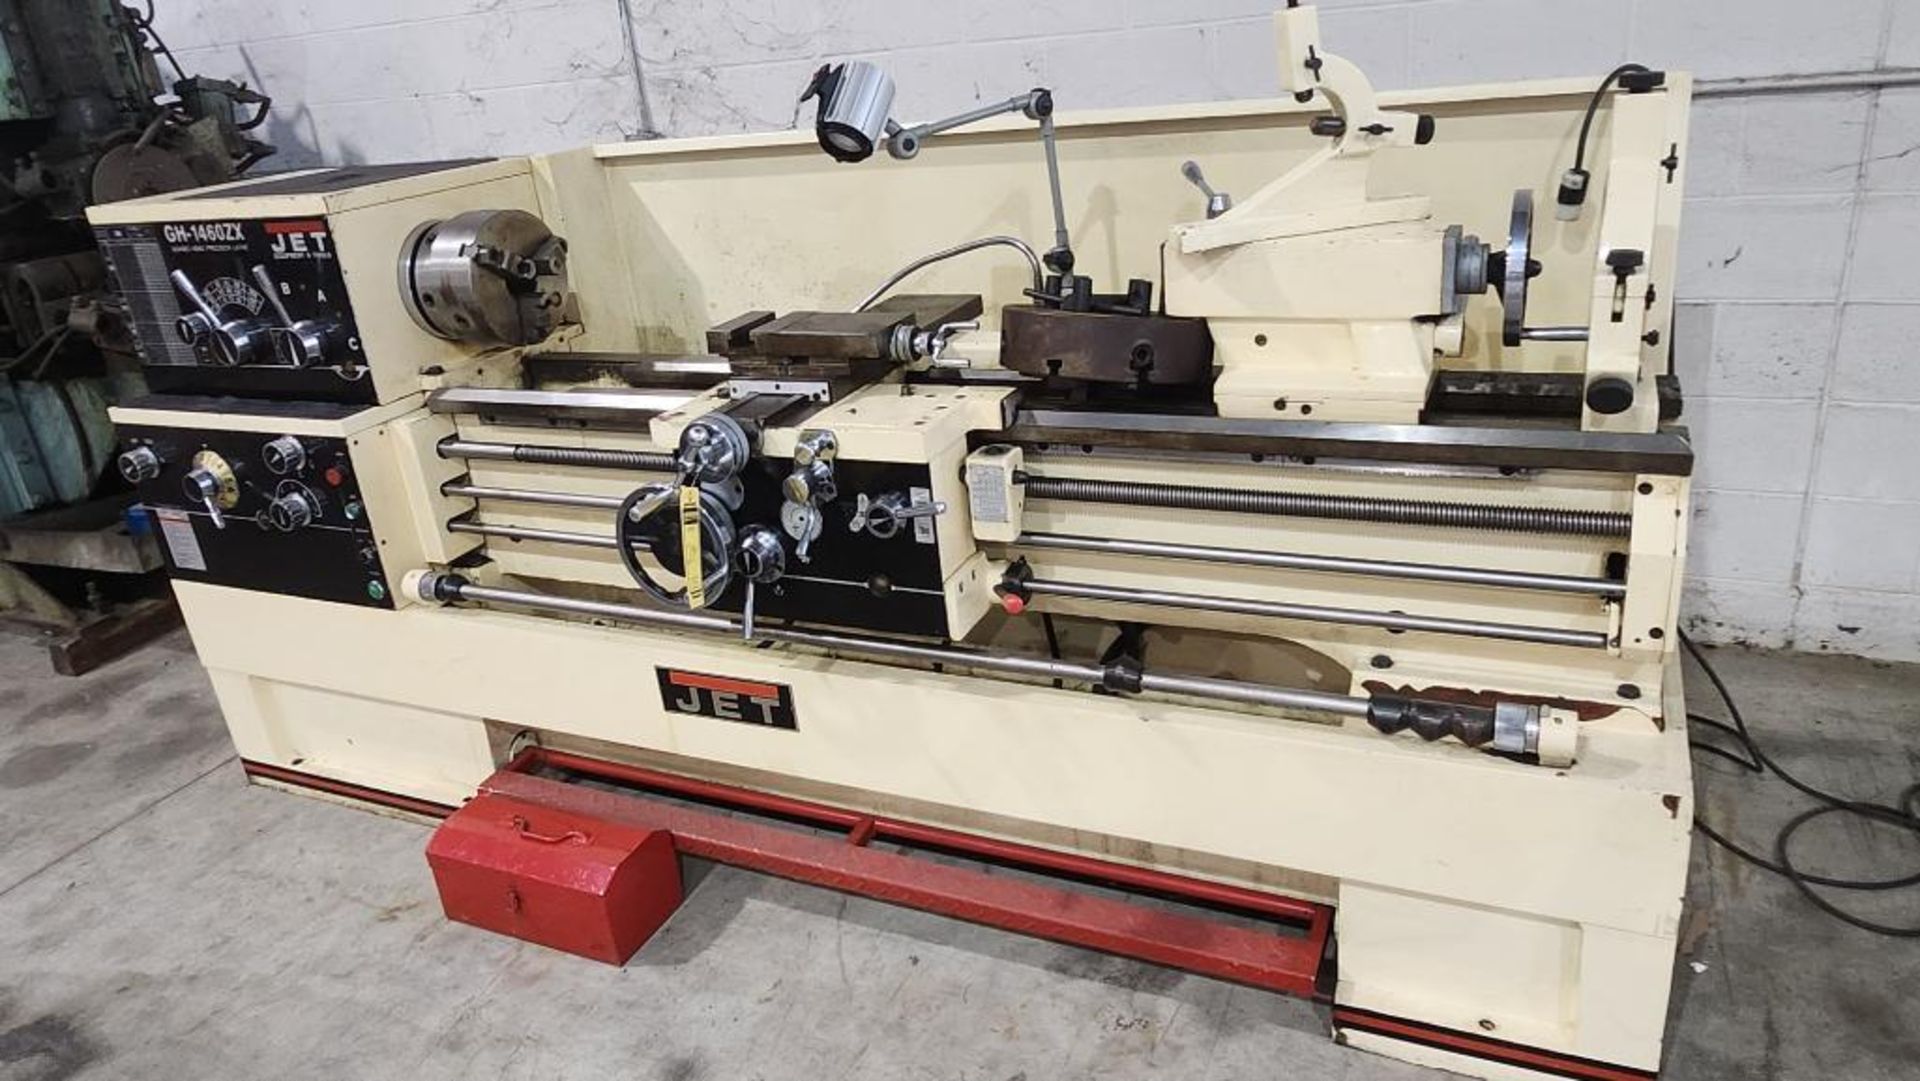 Jet Geared Head Precision Lathe, Model GH-1460ZX, S/N 000821ZX204, 230V/460V, 3-Phase - Image 2 of 14